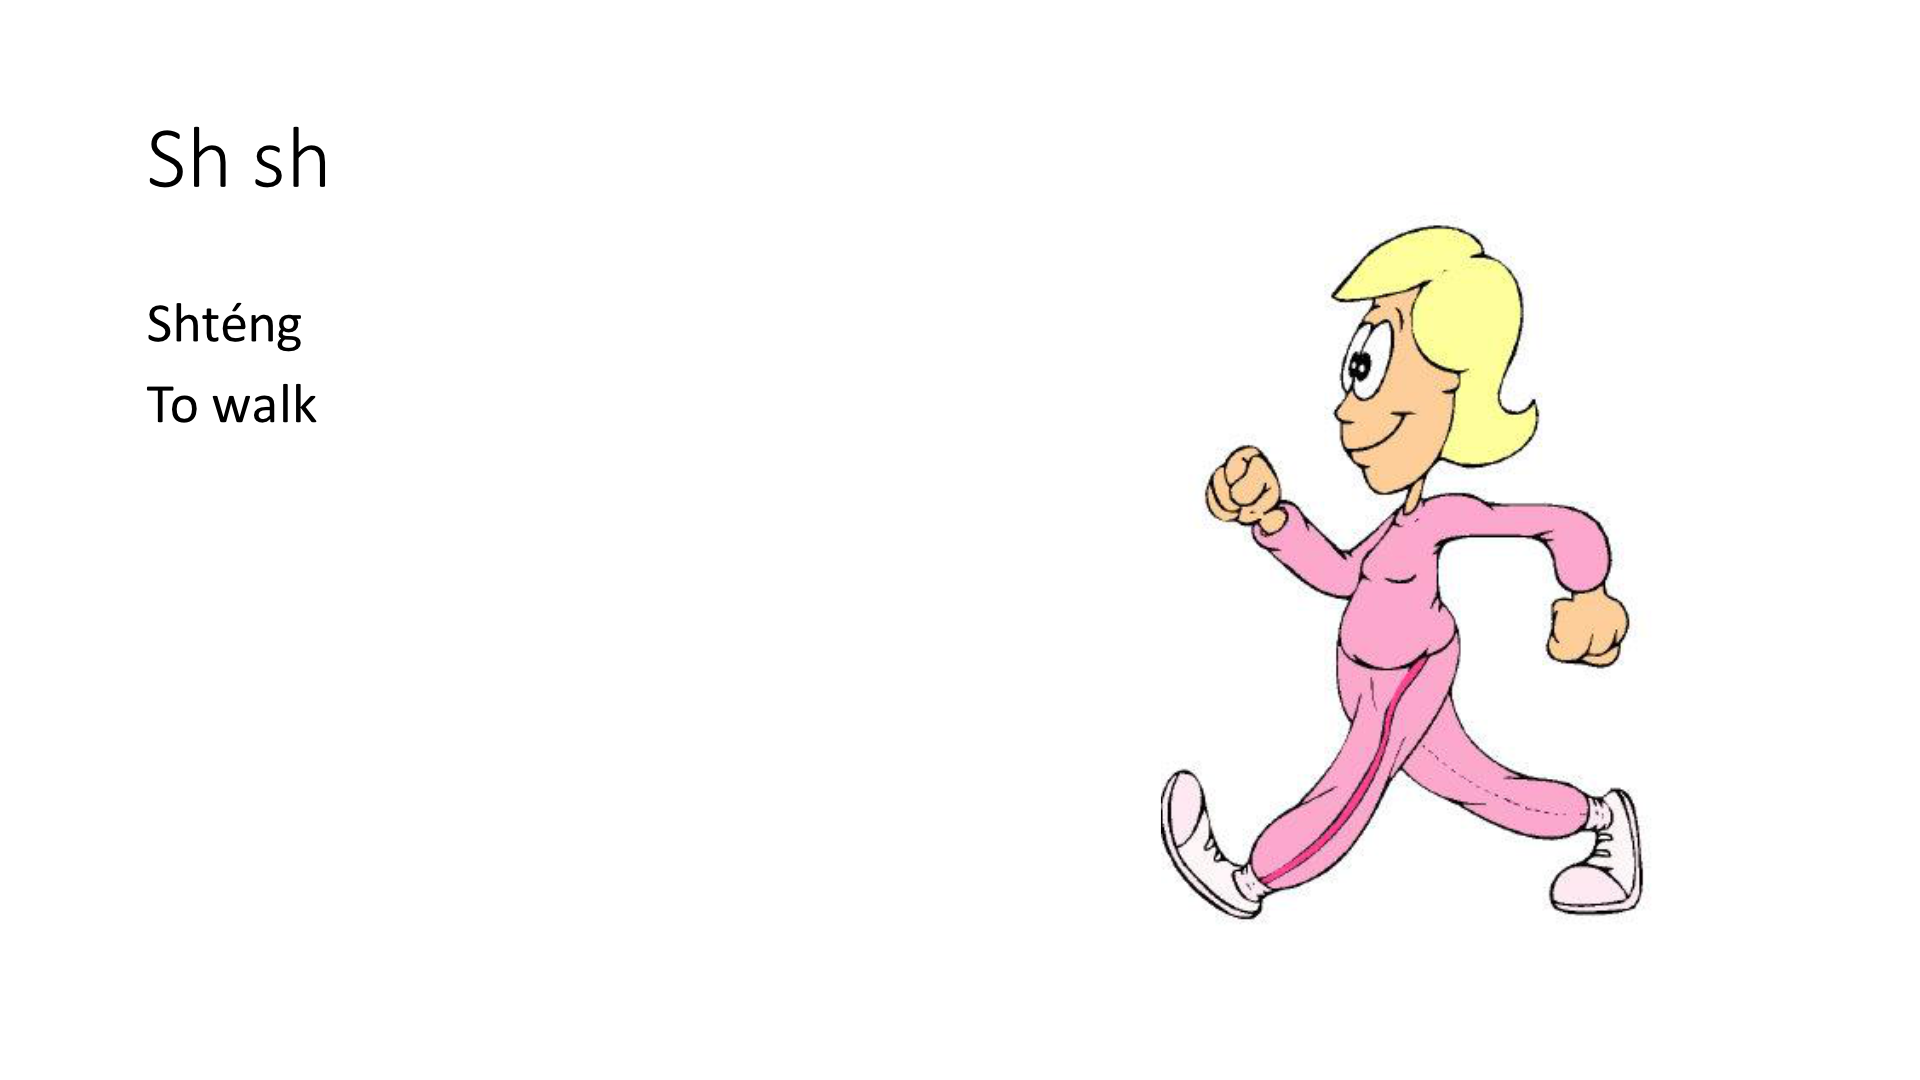 Illustration of a person walking